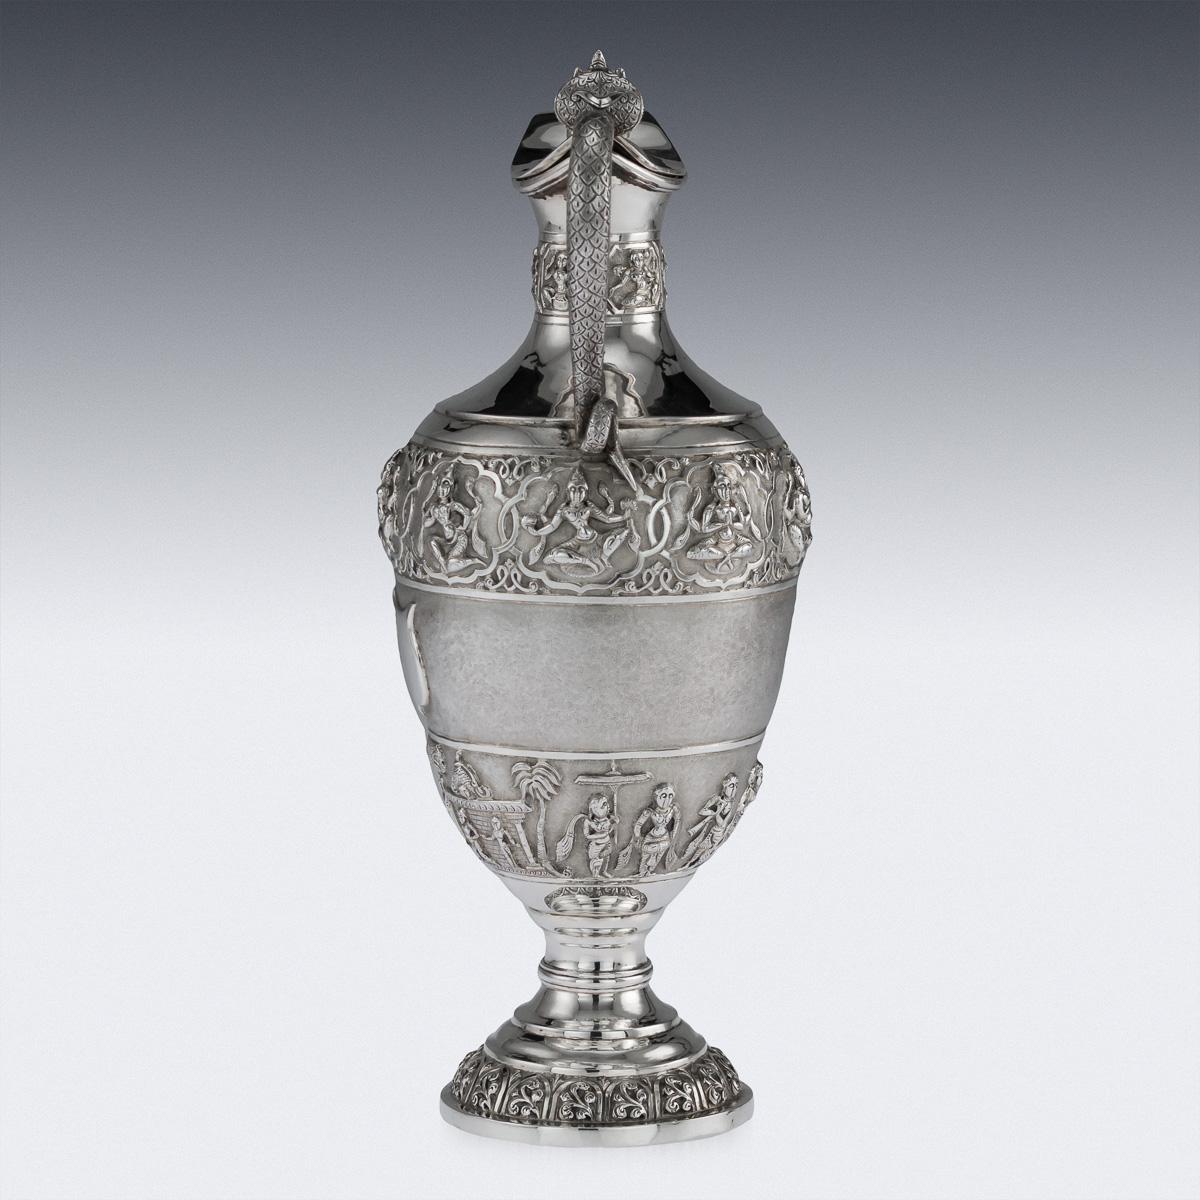 Antique late 19th century Indian Colonial solid silver repousse ewer, the top band is beautifully chased and repousse' decorated depicting Hindu gods and goddesses in elaborate cartooches, and the bottom band depicting religious processions on